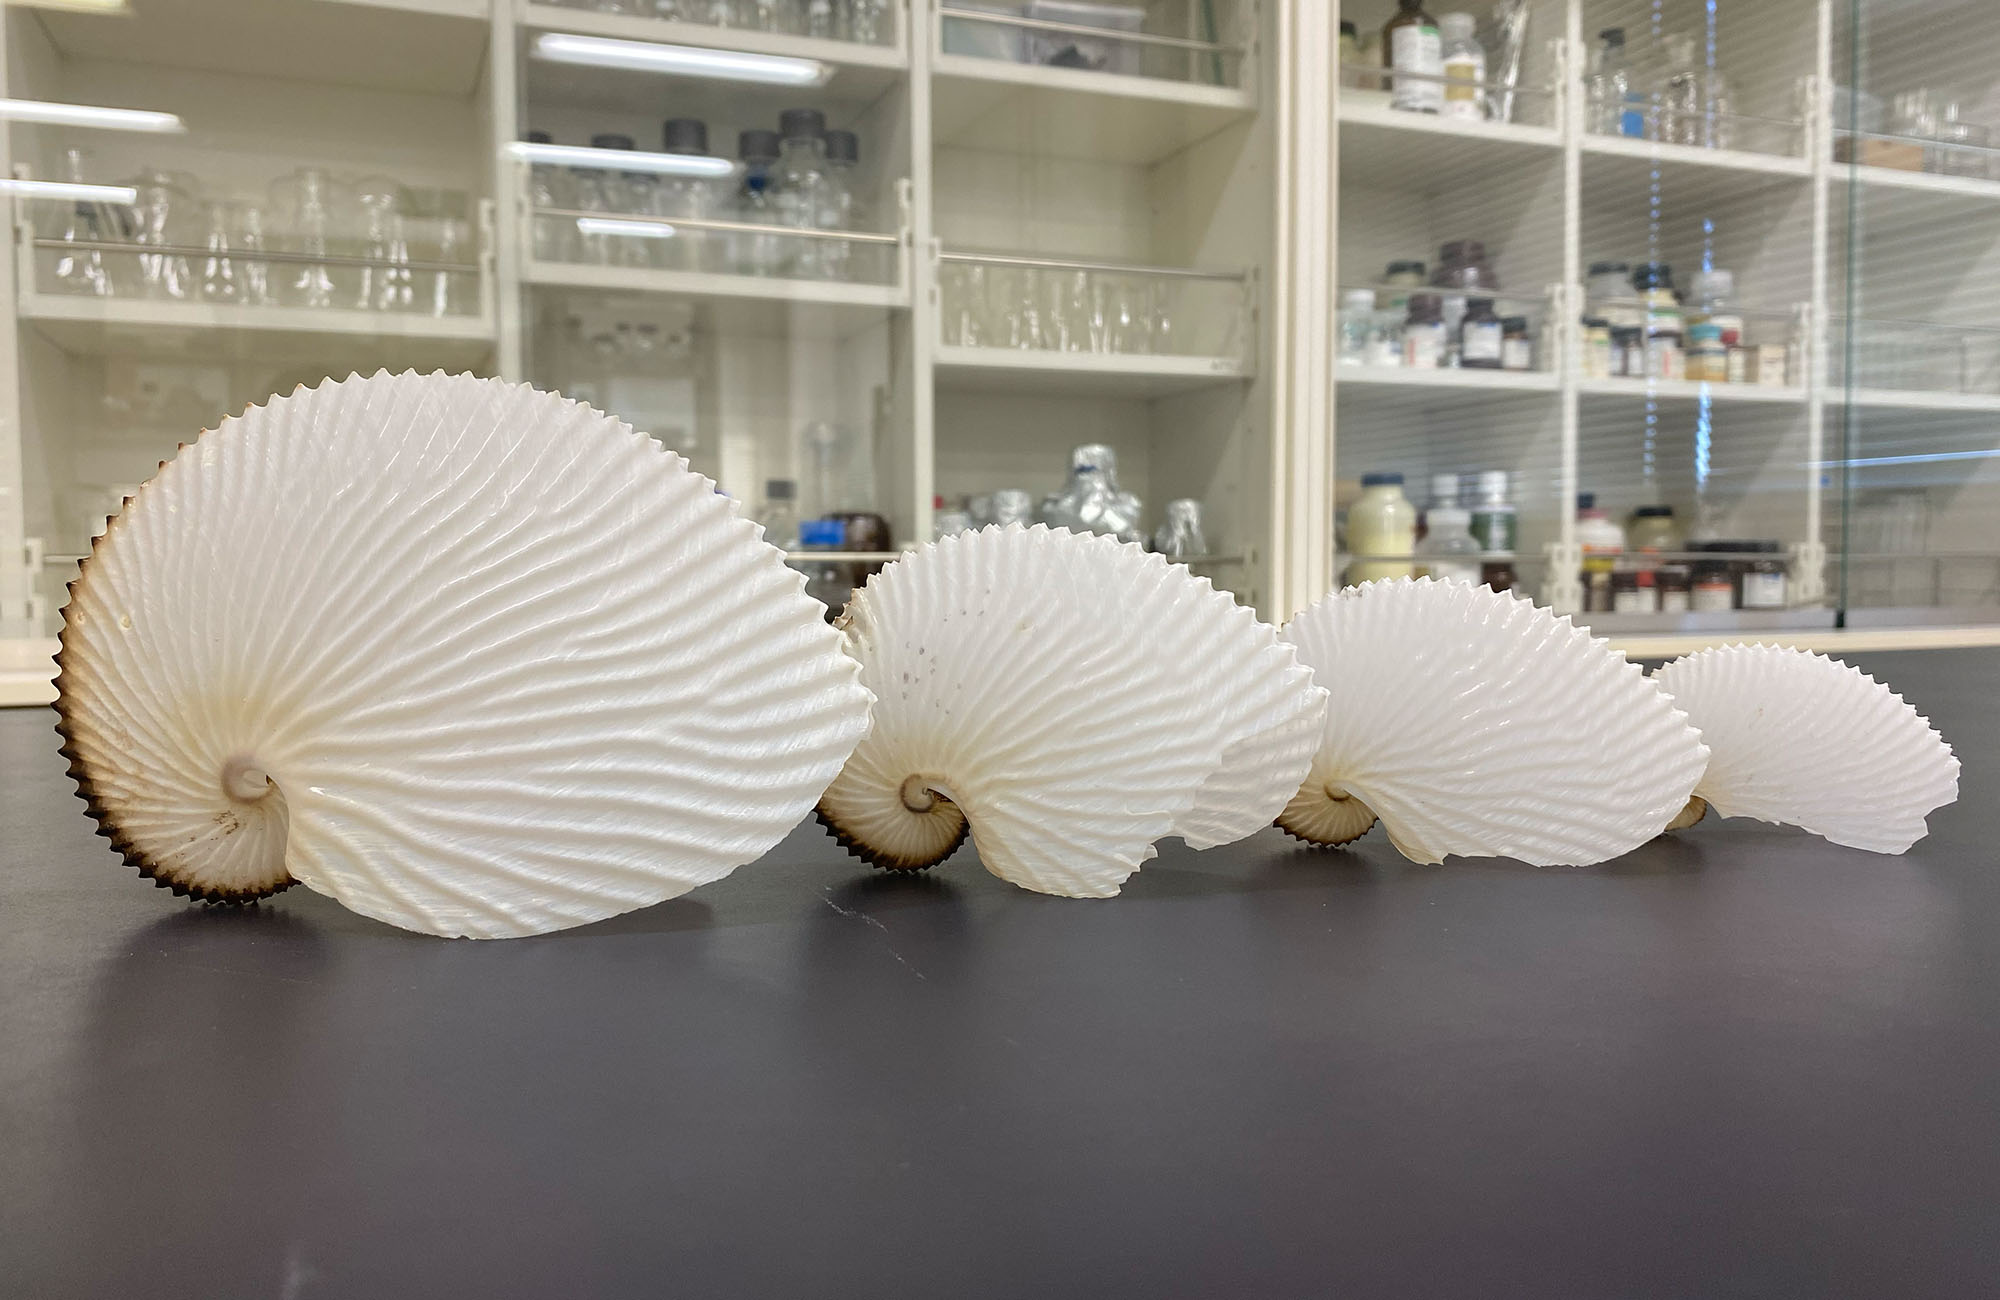 varying sizes of argonaut egg cases are lined up